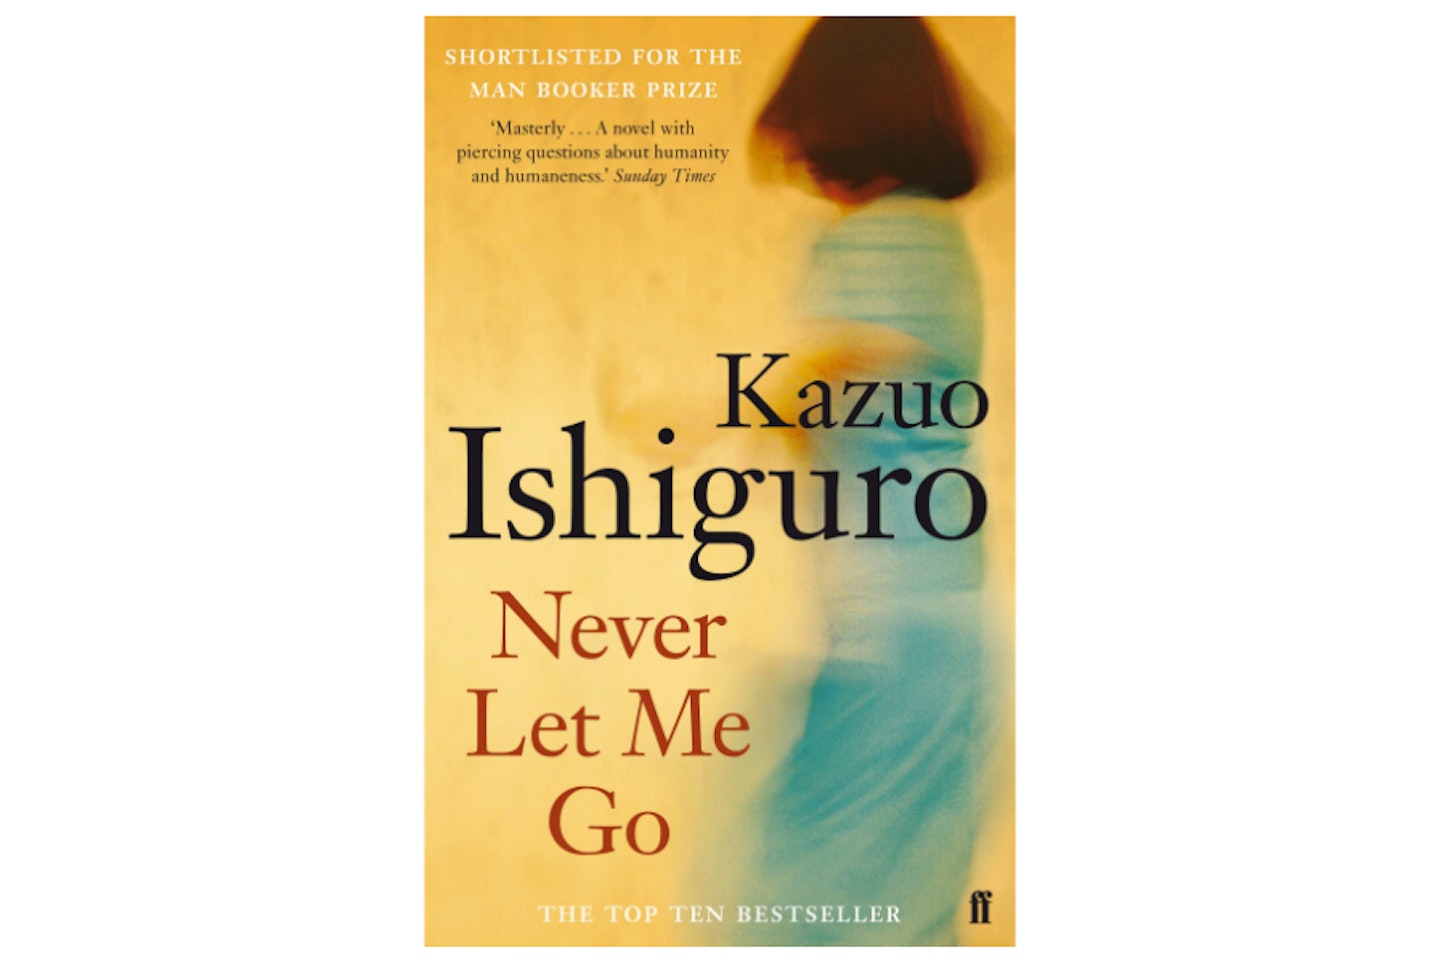 Never Let Me Go by Kazuo Ishiguro, £5.97